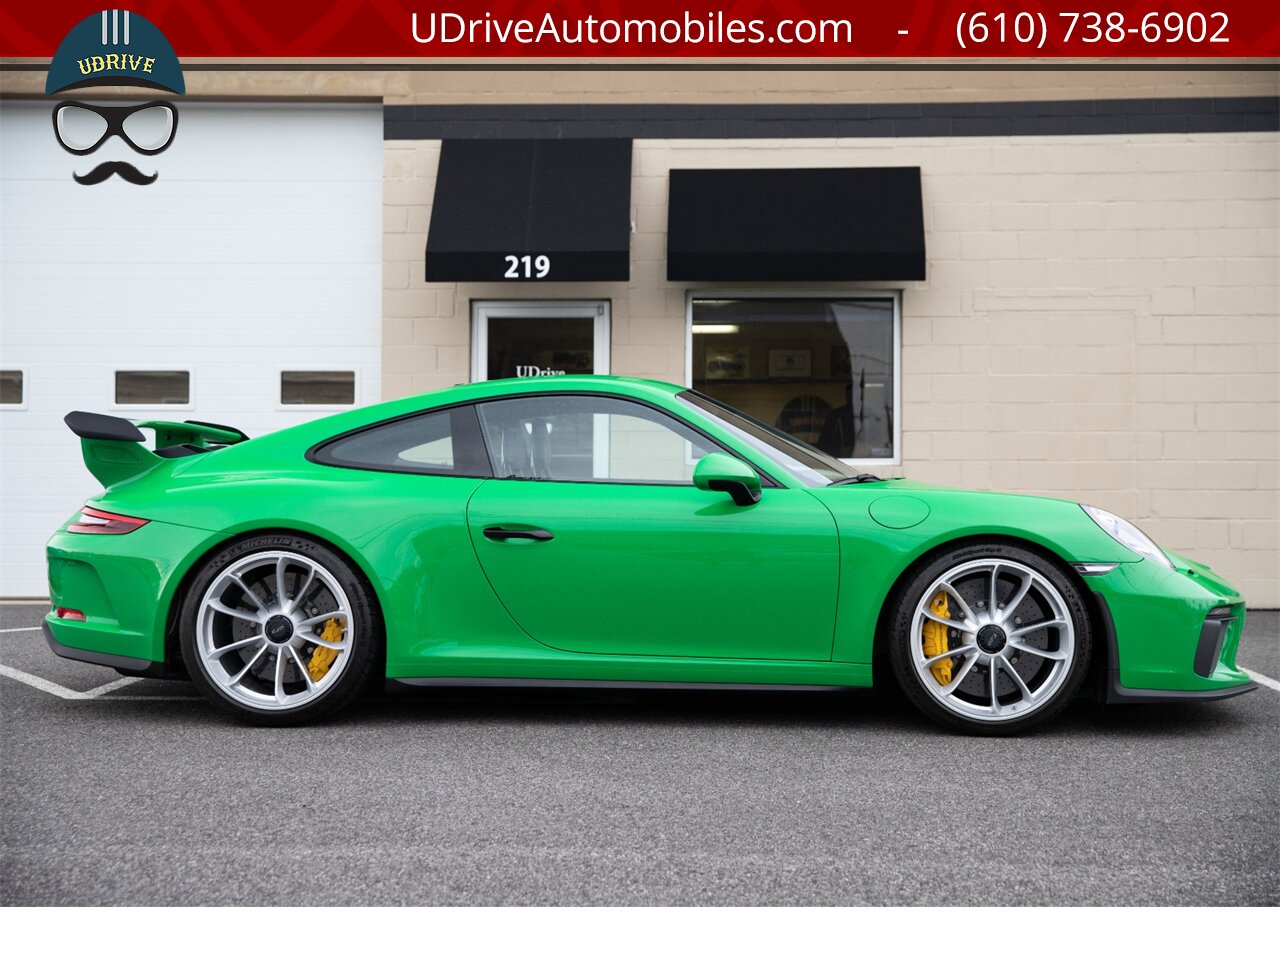 2018 Porsche 911 GT3 6 Speed Paint To Sample Viper Green 48 Miles  Front Axle Lift PCCB Carbon Bucket Seats - Photo 16 - West Chester, PA 19382